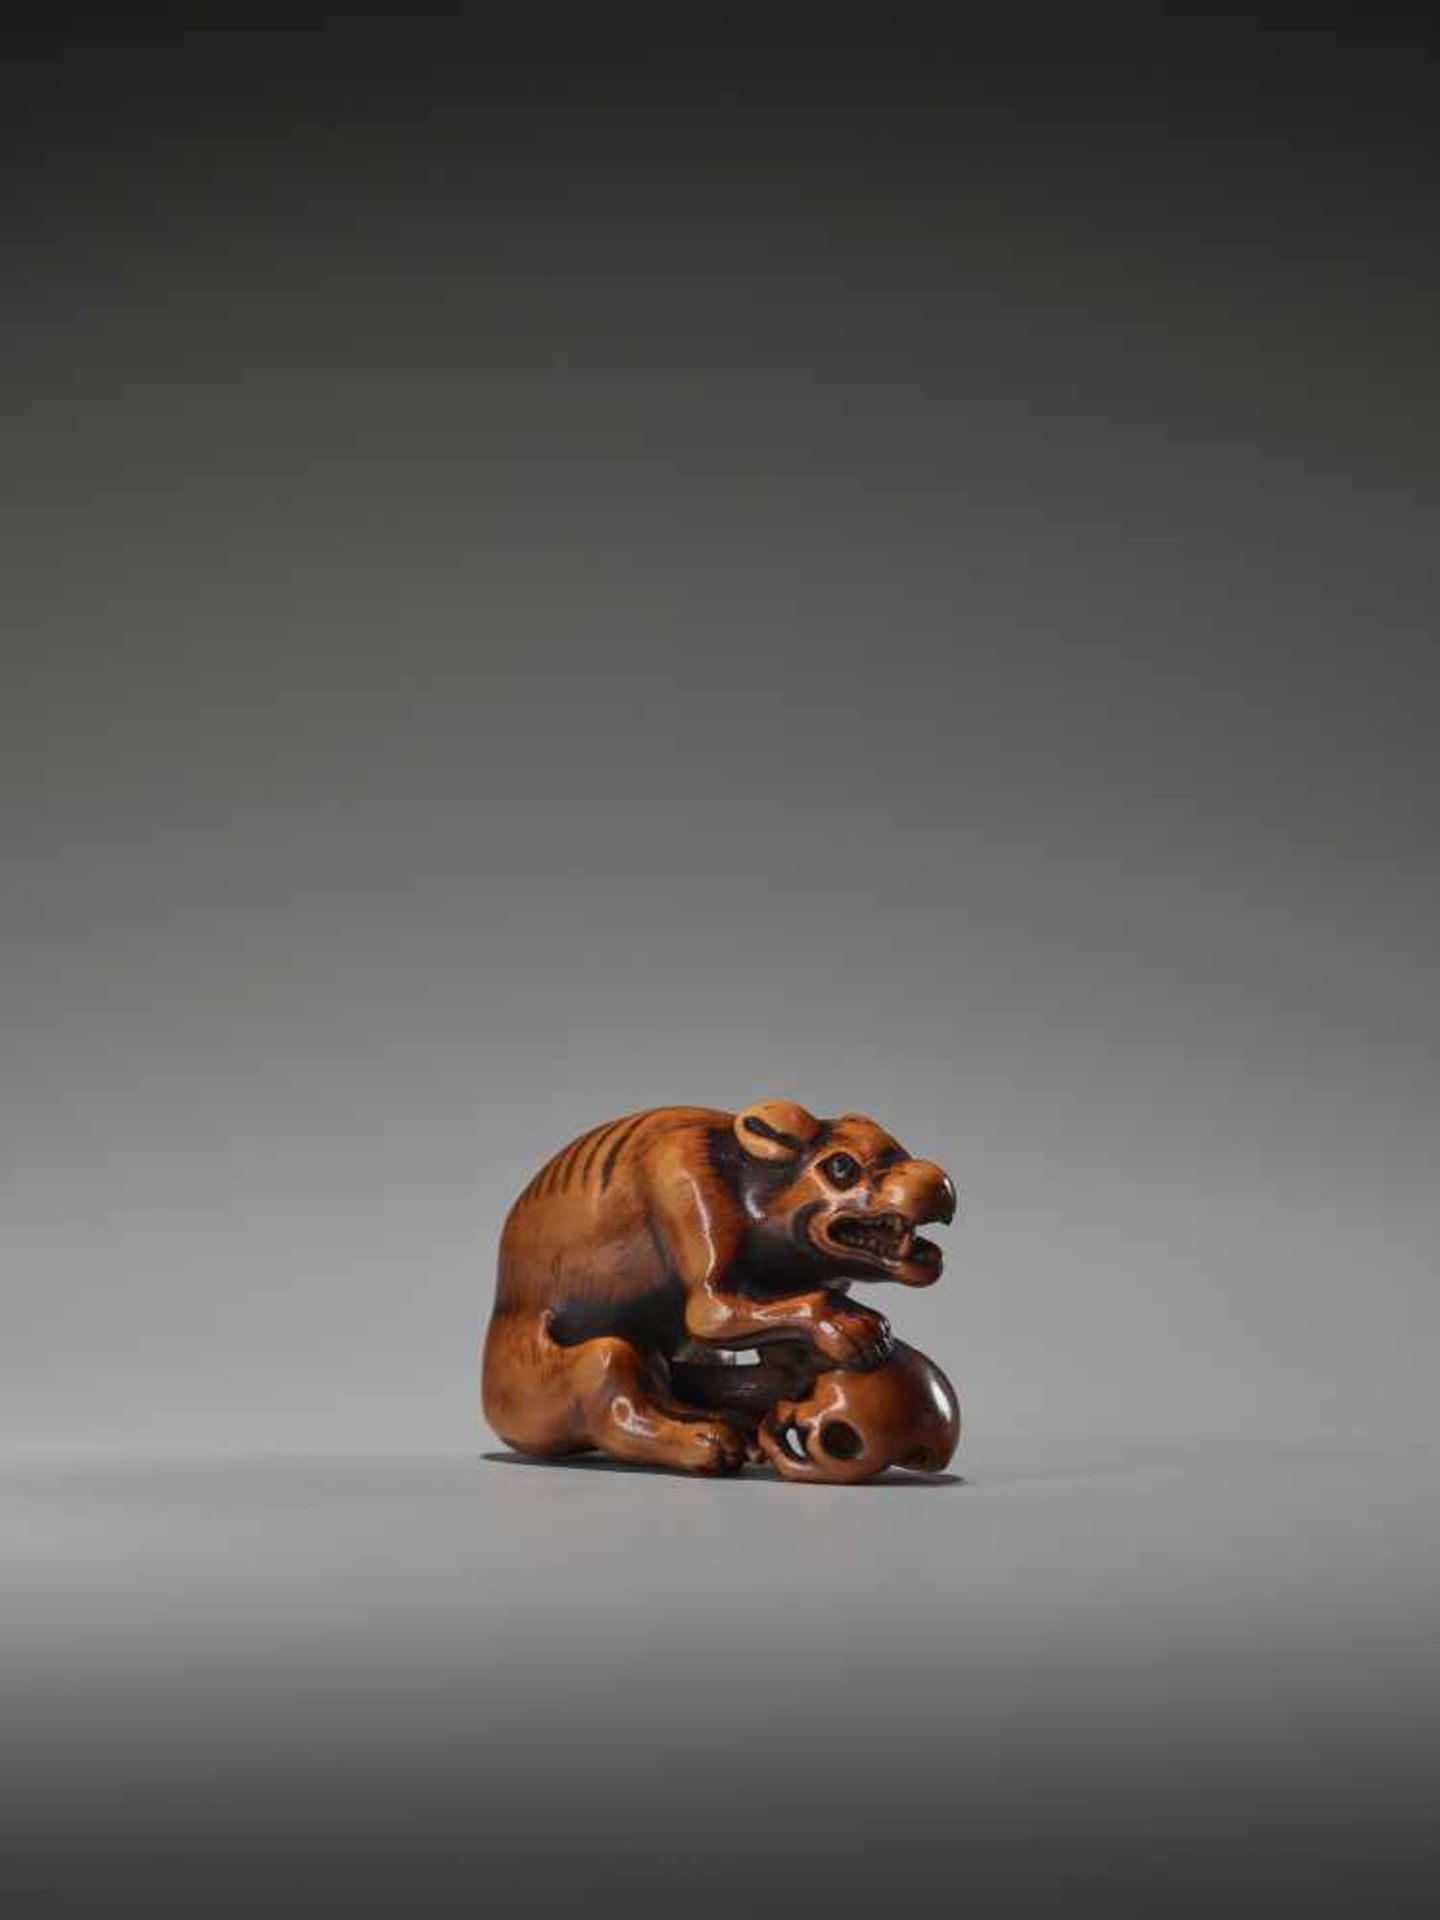 A POWERFUL WOOD NETSUKE OF A WOLF WITH A SKULL UnsignedJapan, 18th century, Edo period (1615-1868)